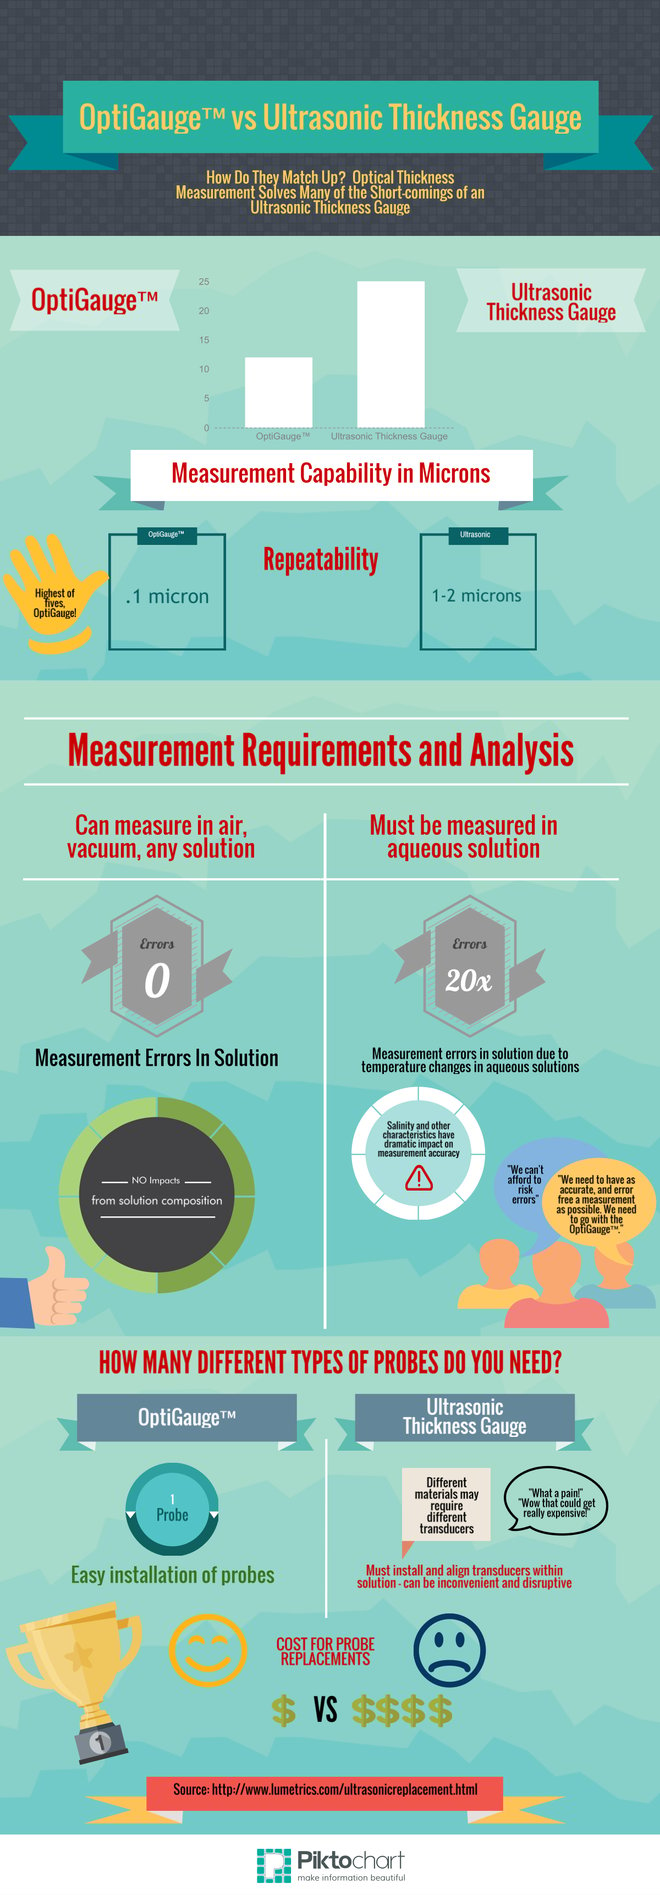 ultrasonic thickness gauge replacement, optical thickness measurement, infographic